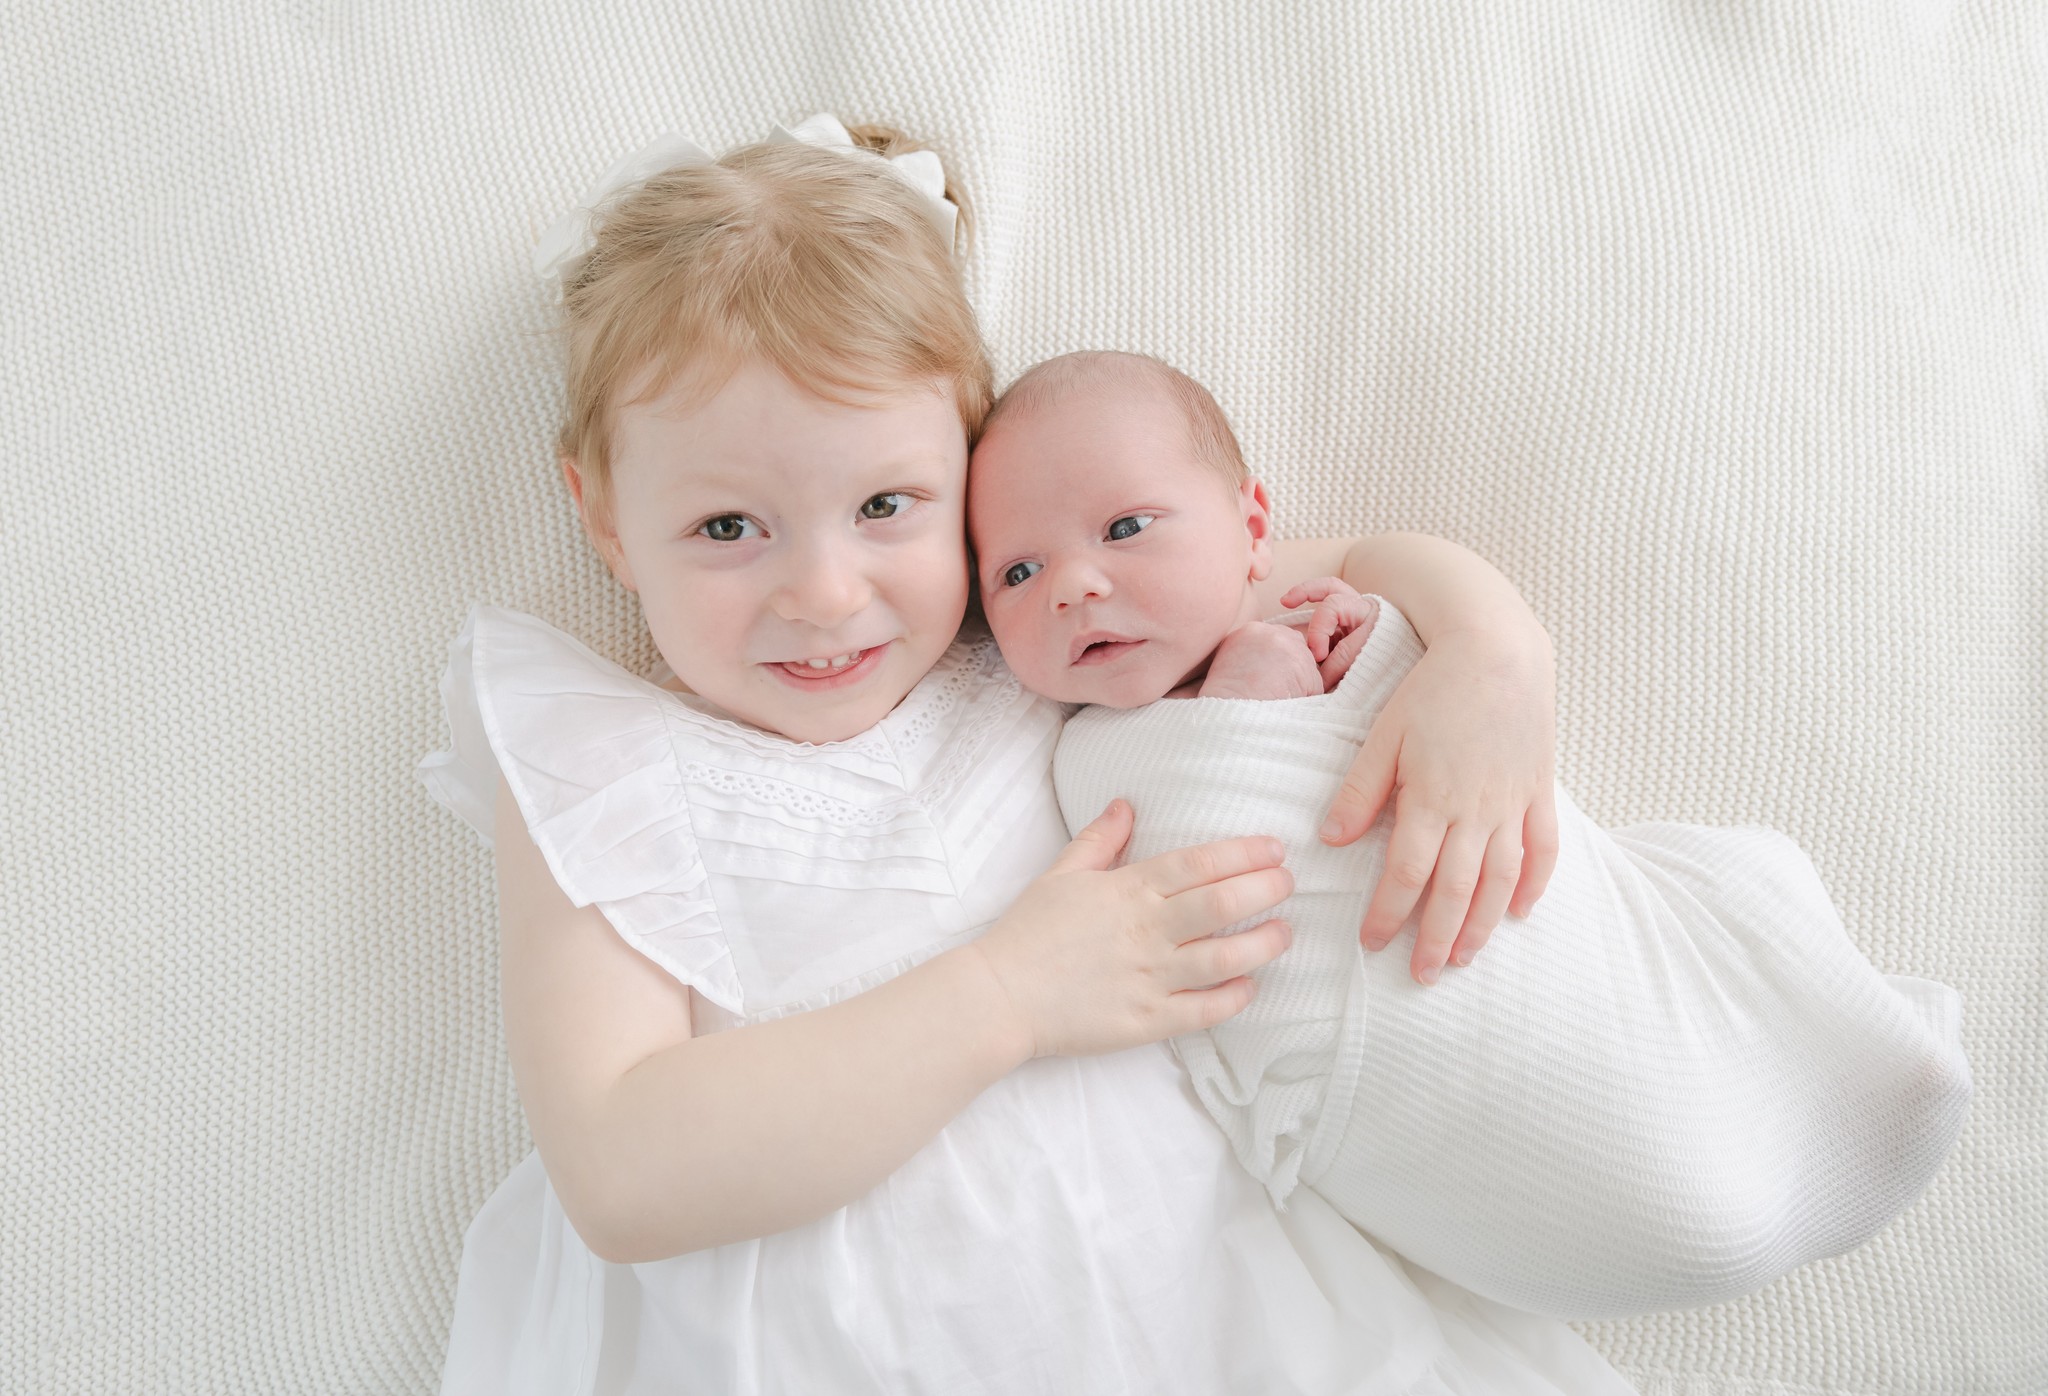 A toddler girl in a white dress cuddles on a white bed with her newborn baby sibling in a white swaddle